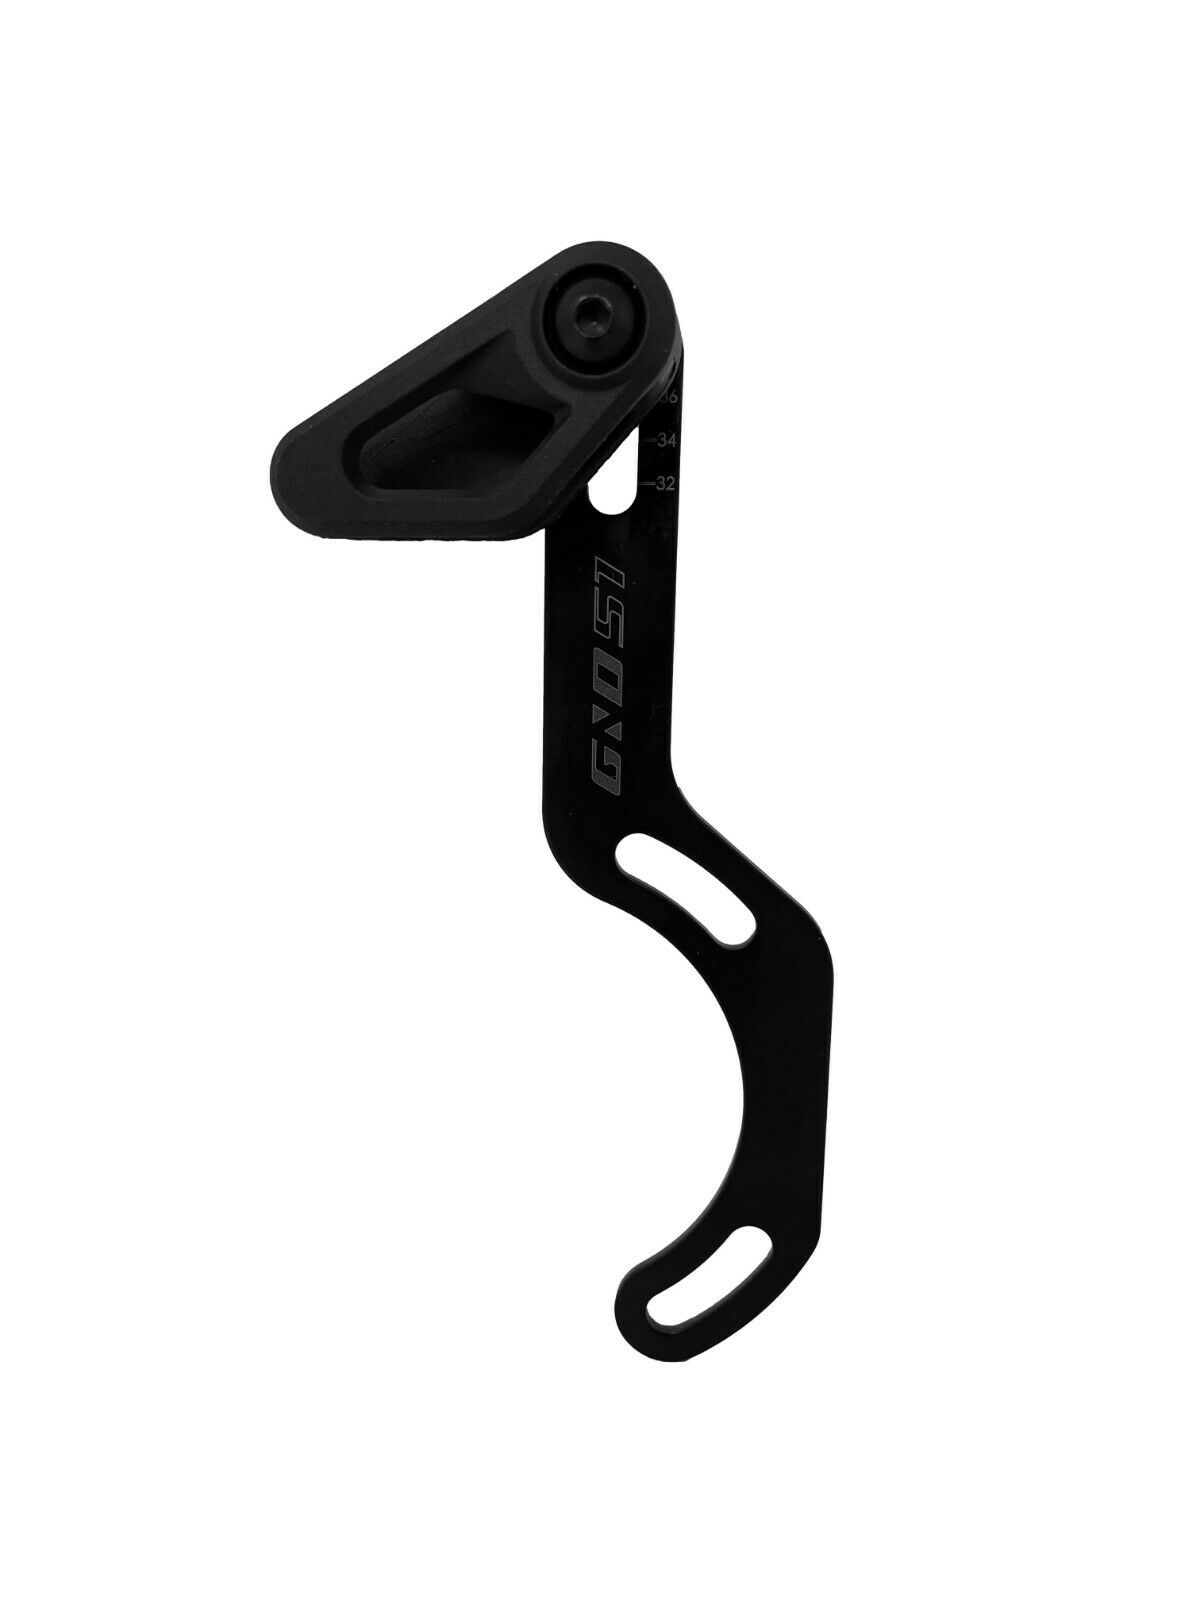 Ghost ISCG 05 32-38T MTB Chain Guide - Sportandleisure.com